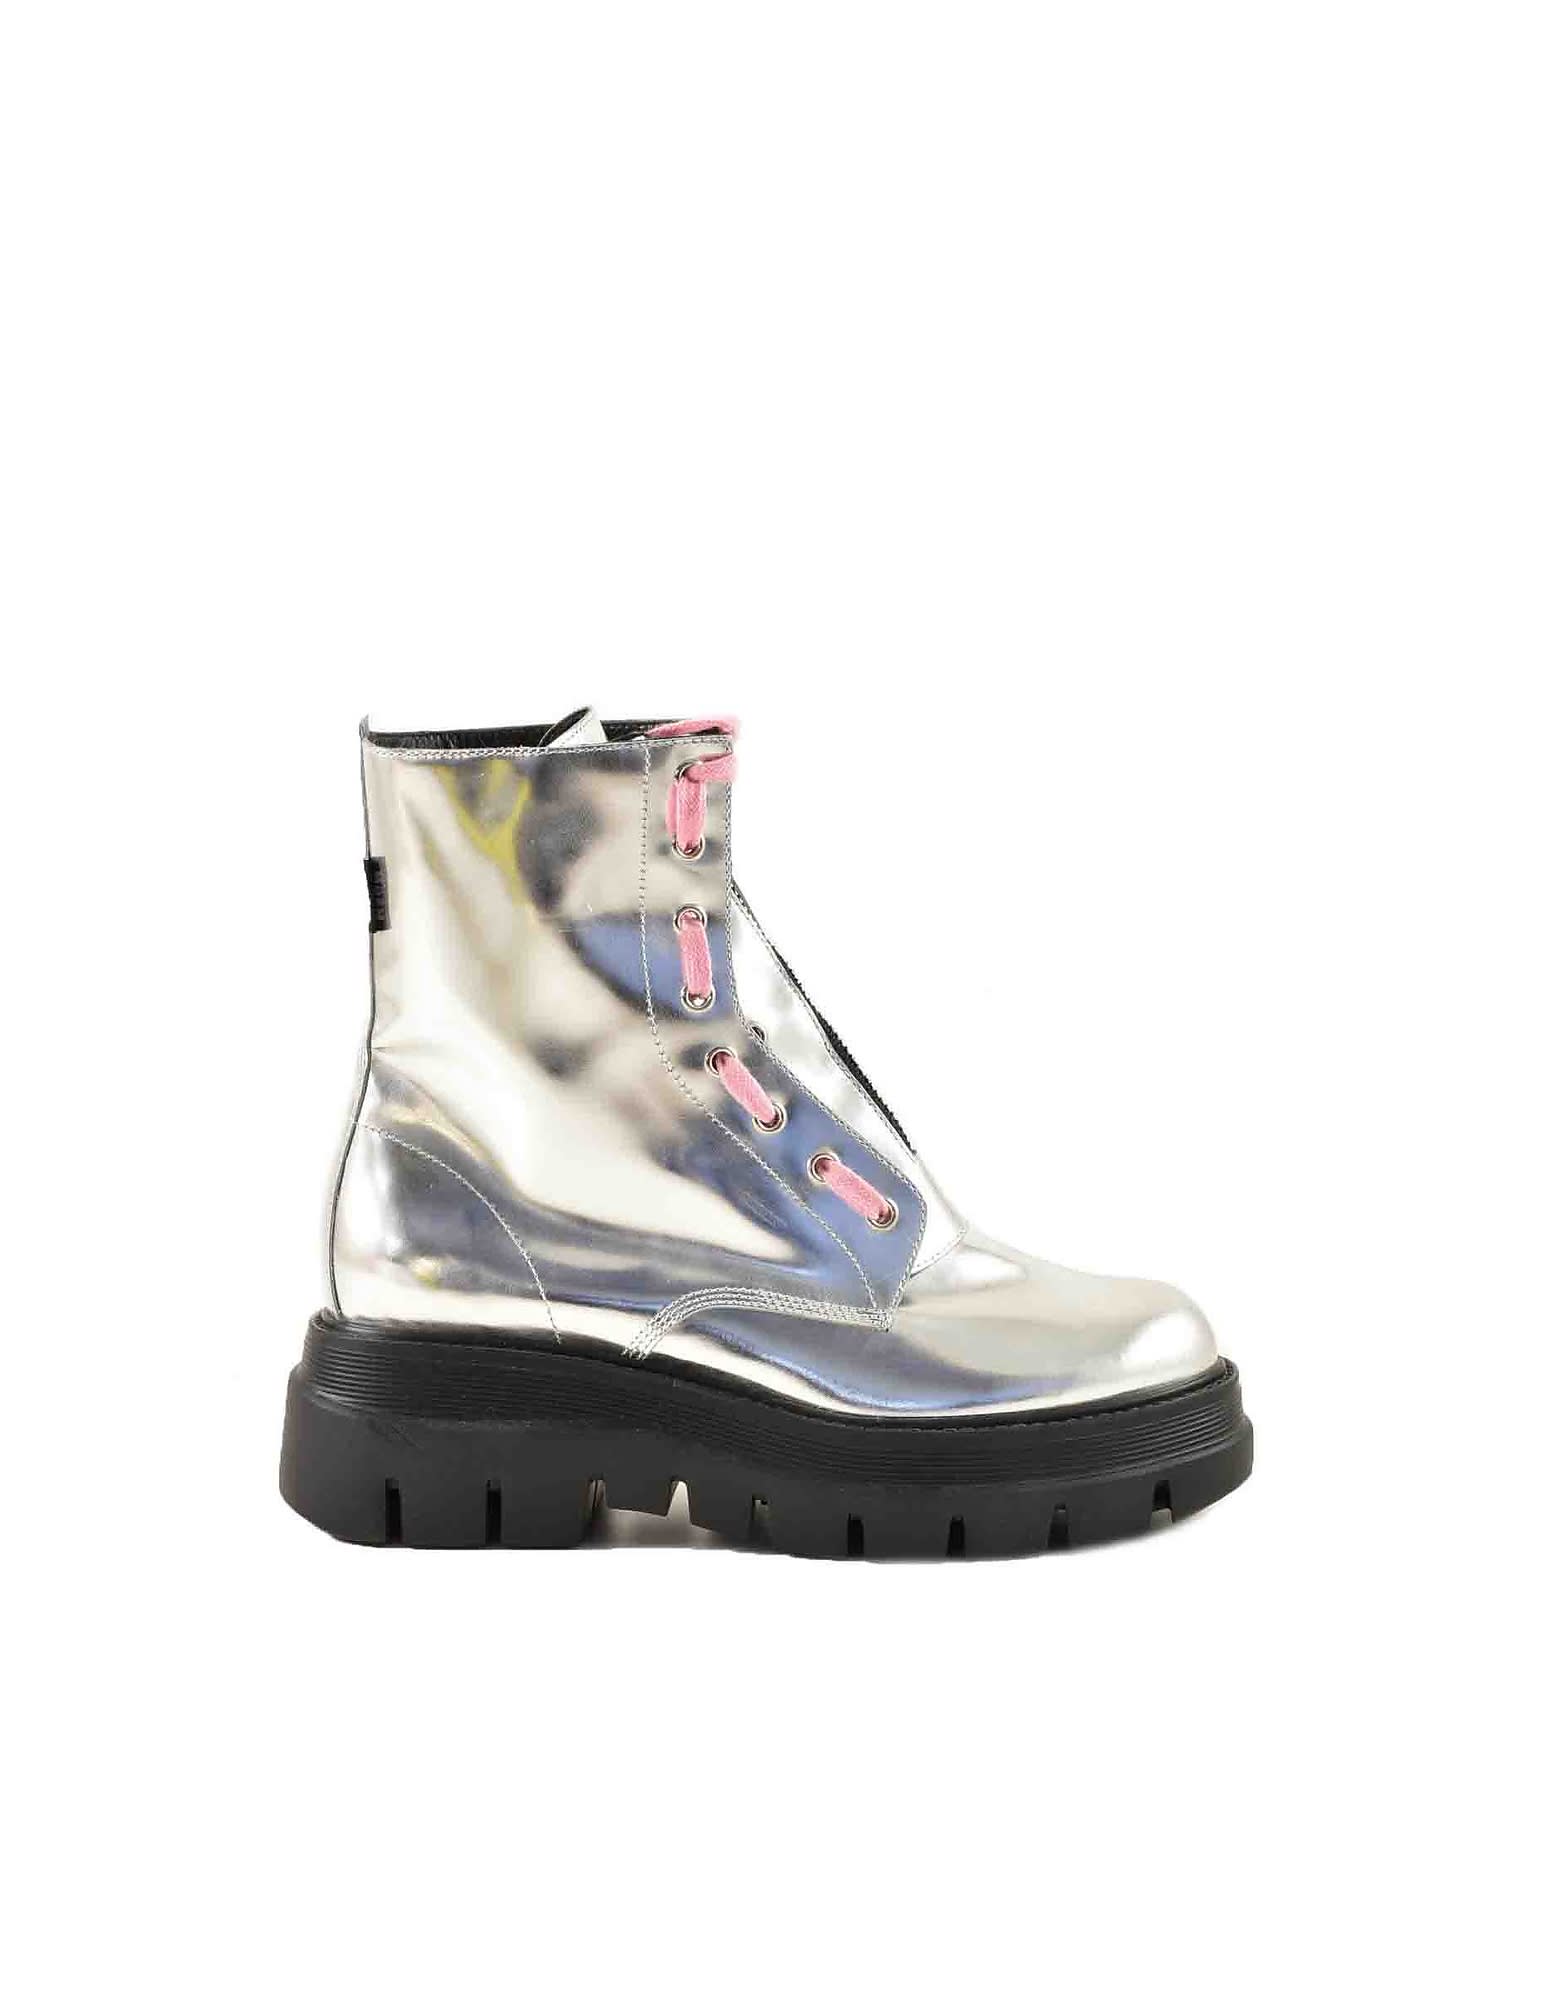 MSGM Womens Silver Booties